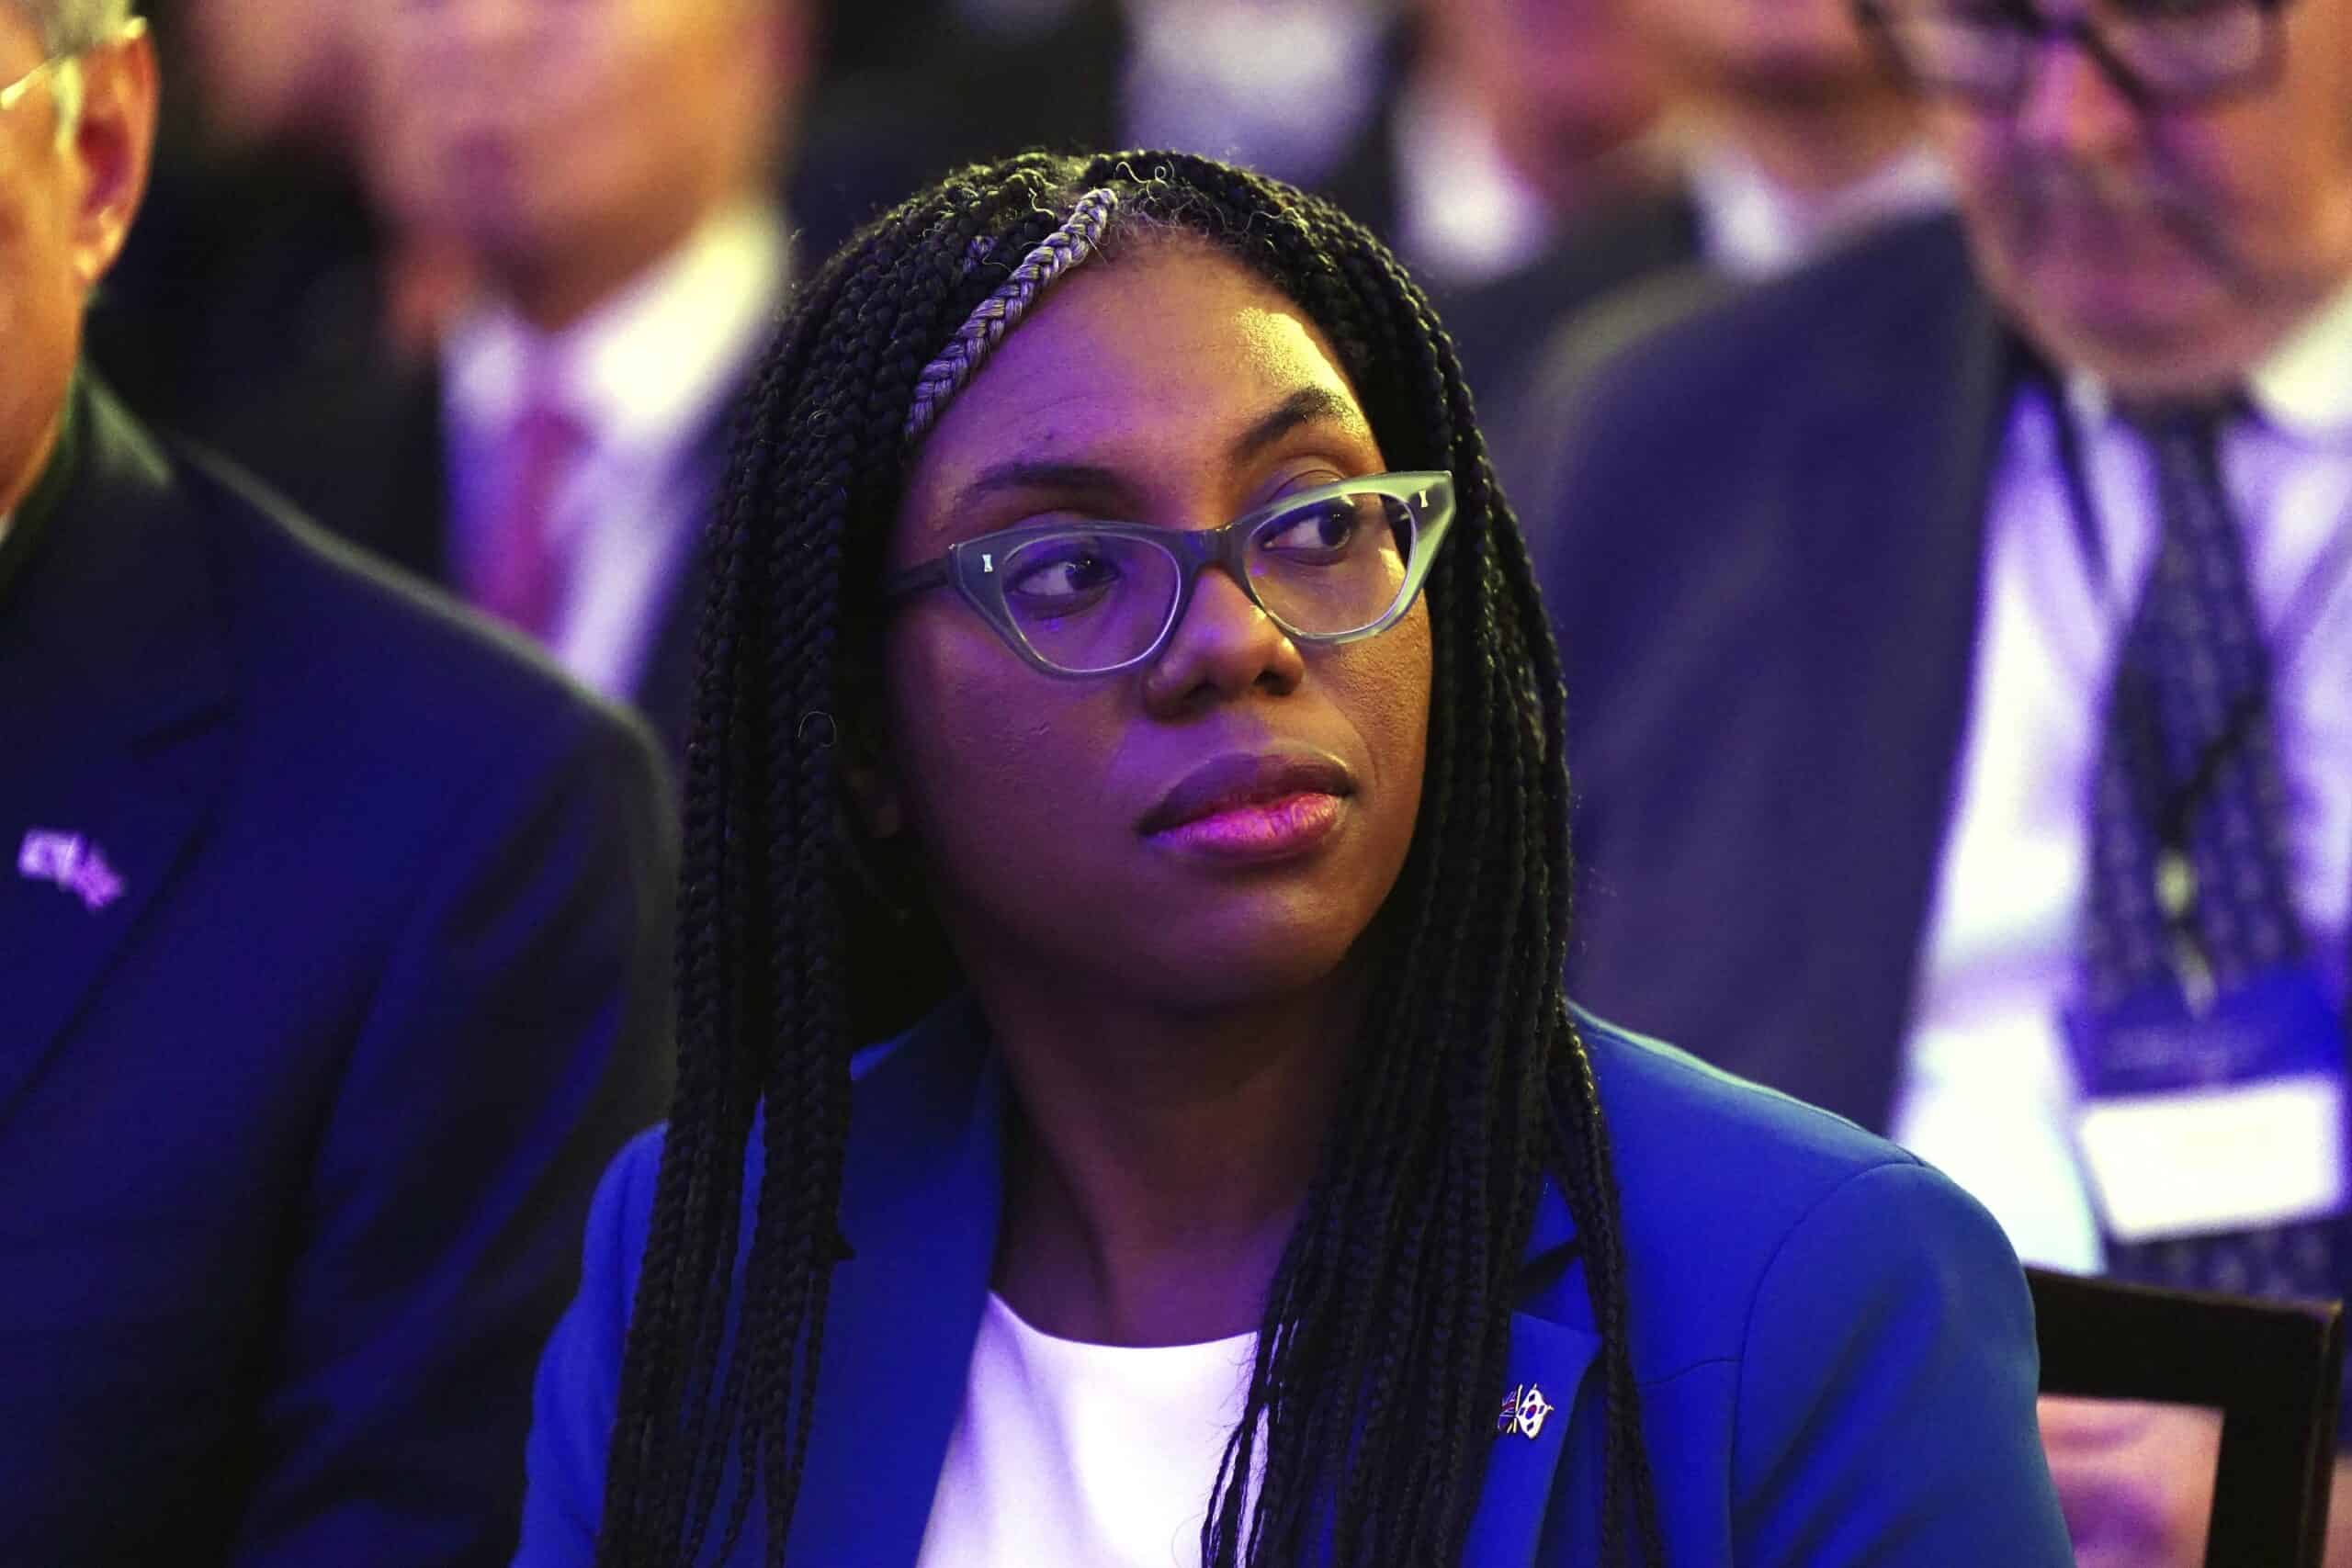 Kemi Badenoch dismisses reports she is part of ‘Evil Plotters’ group